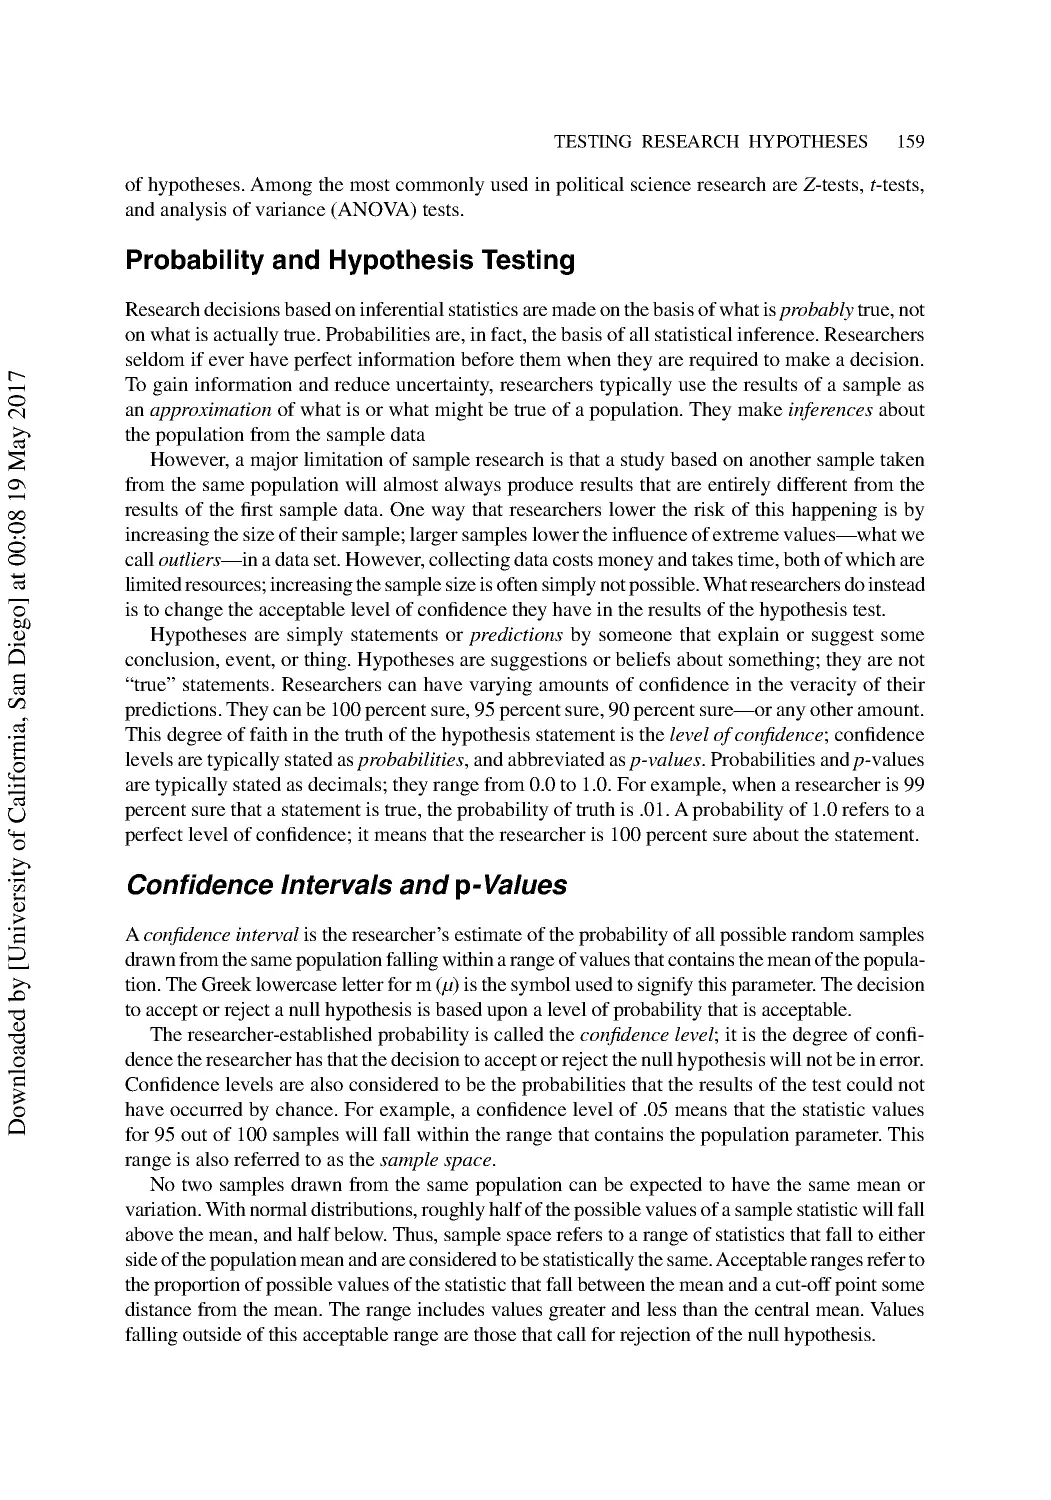 Probability and Hypothesis Testing